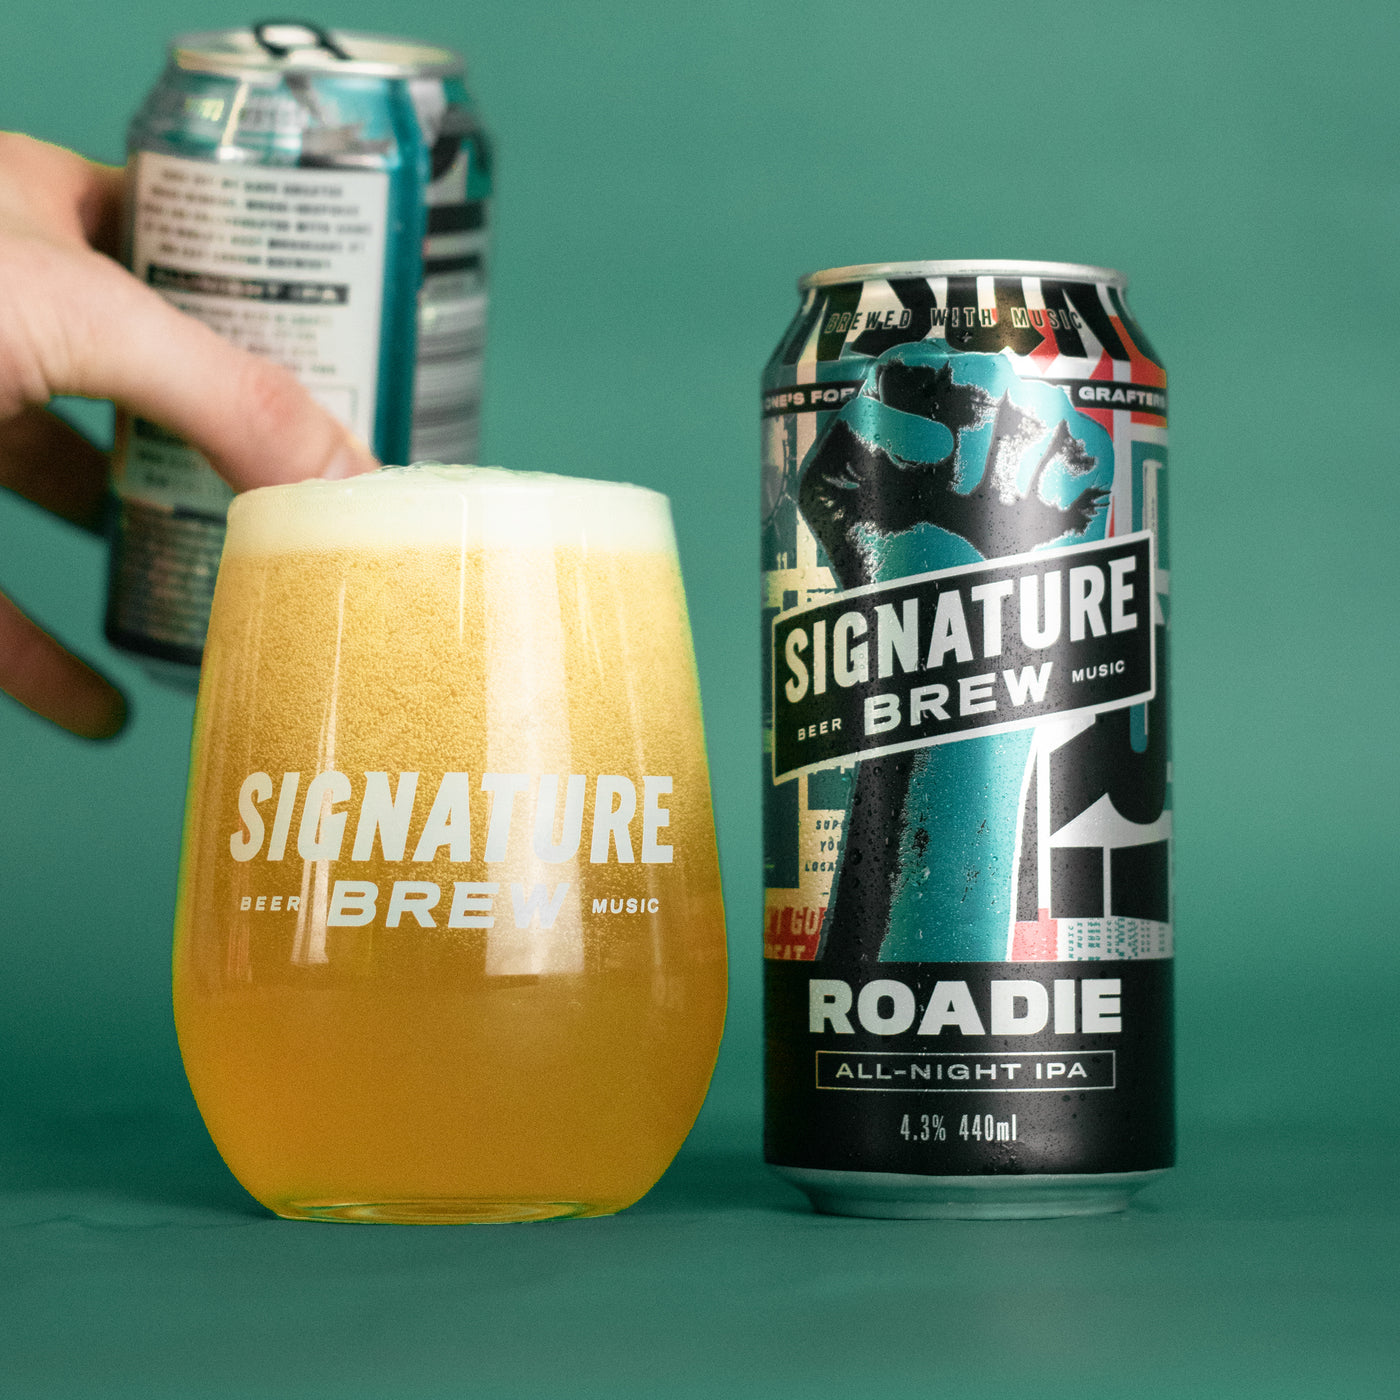 Roadie - All-Night IPA 440ml cans